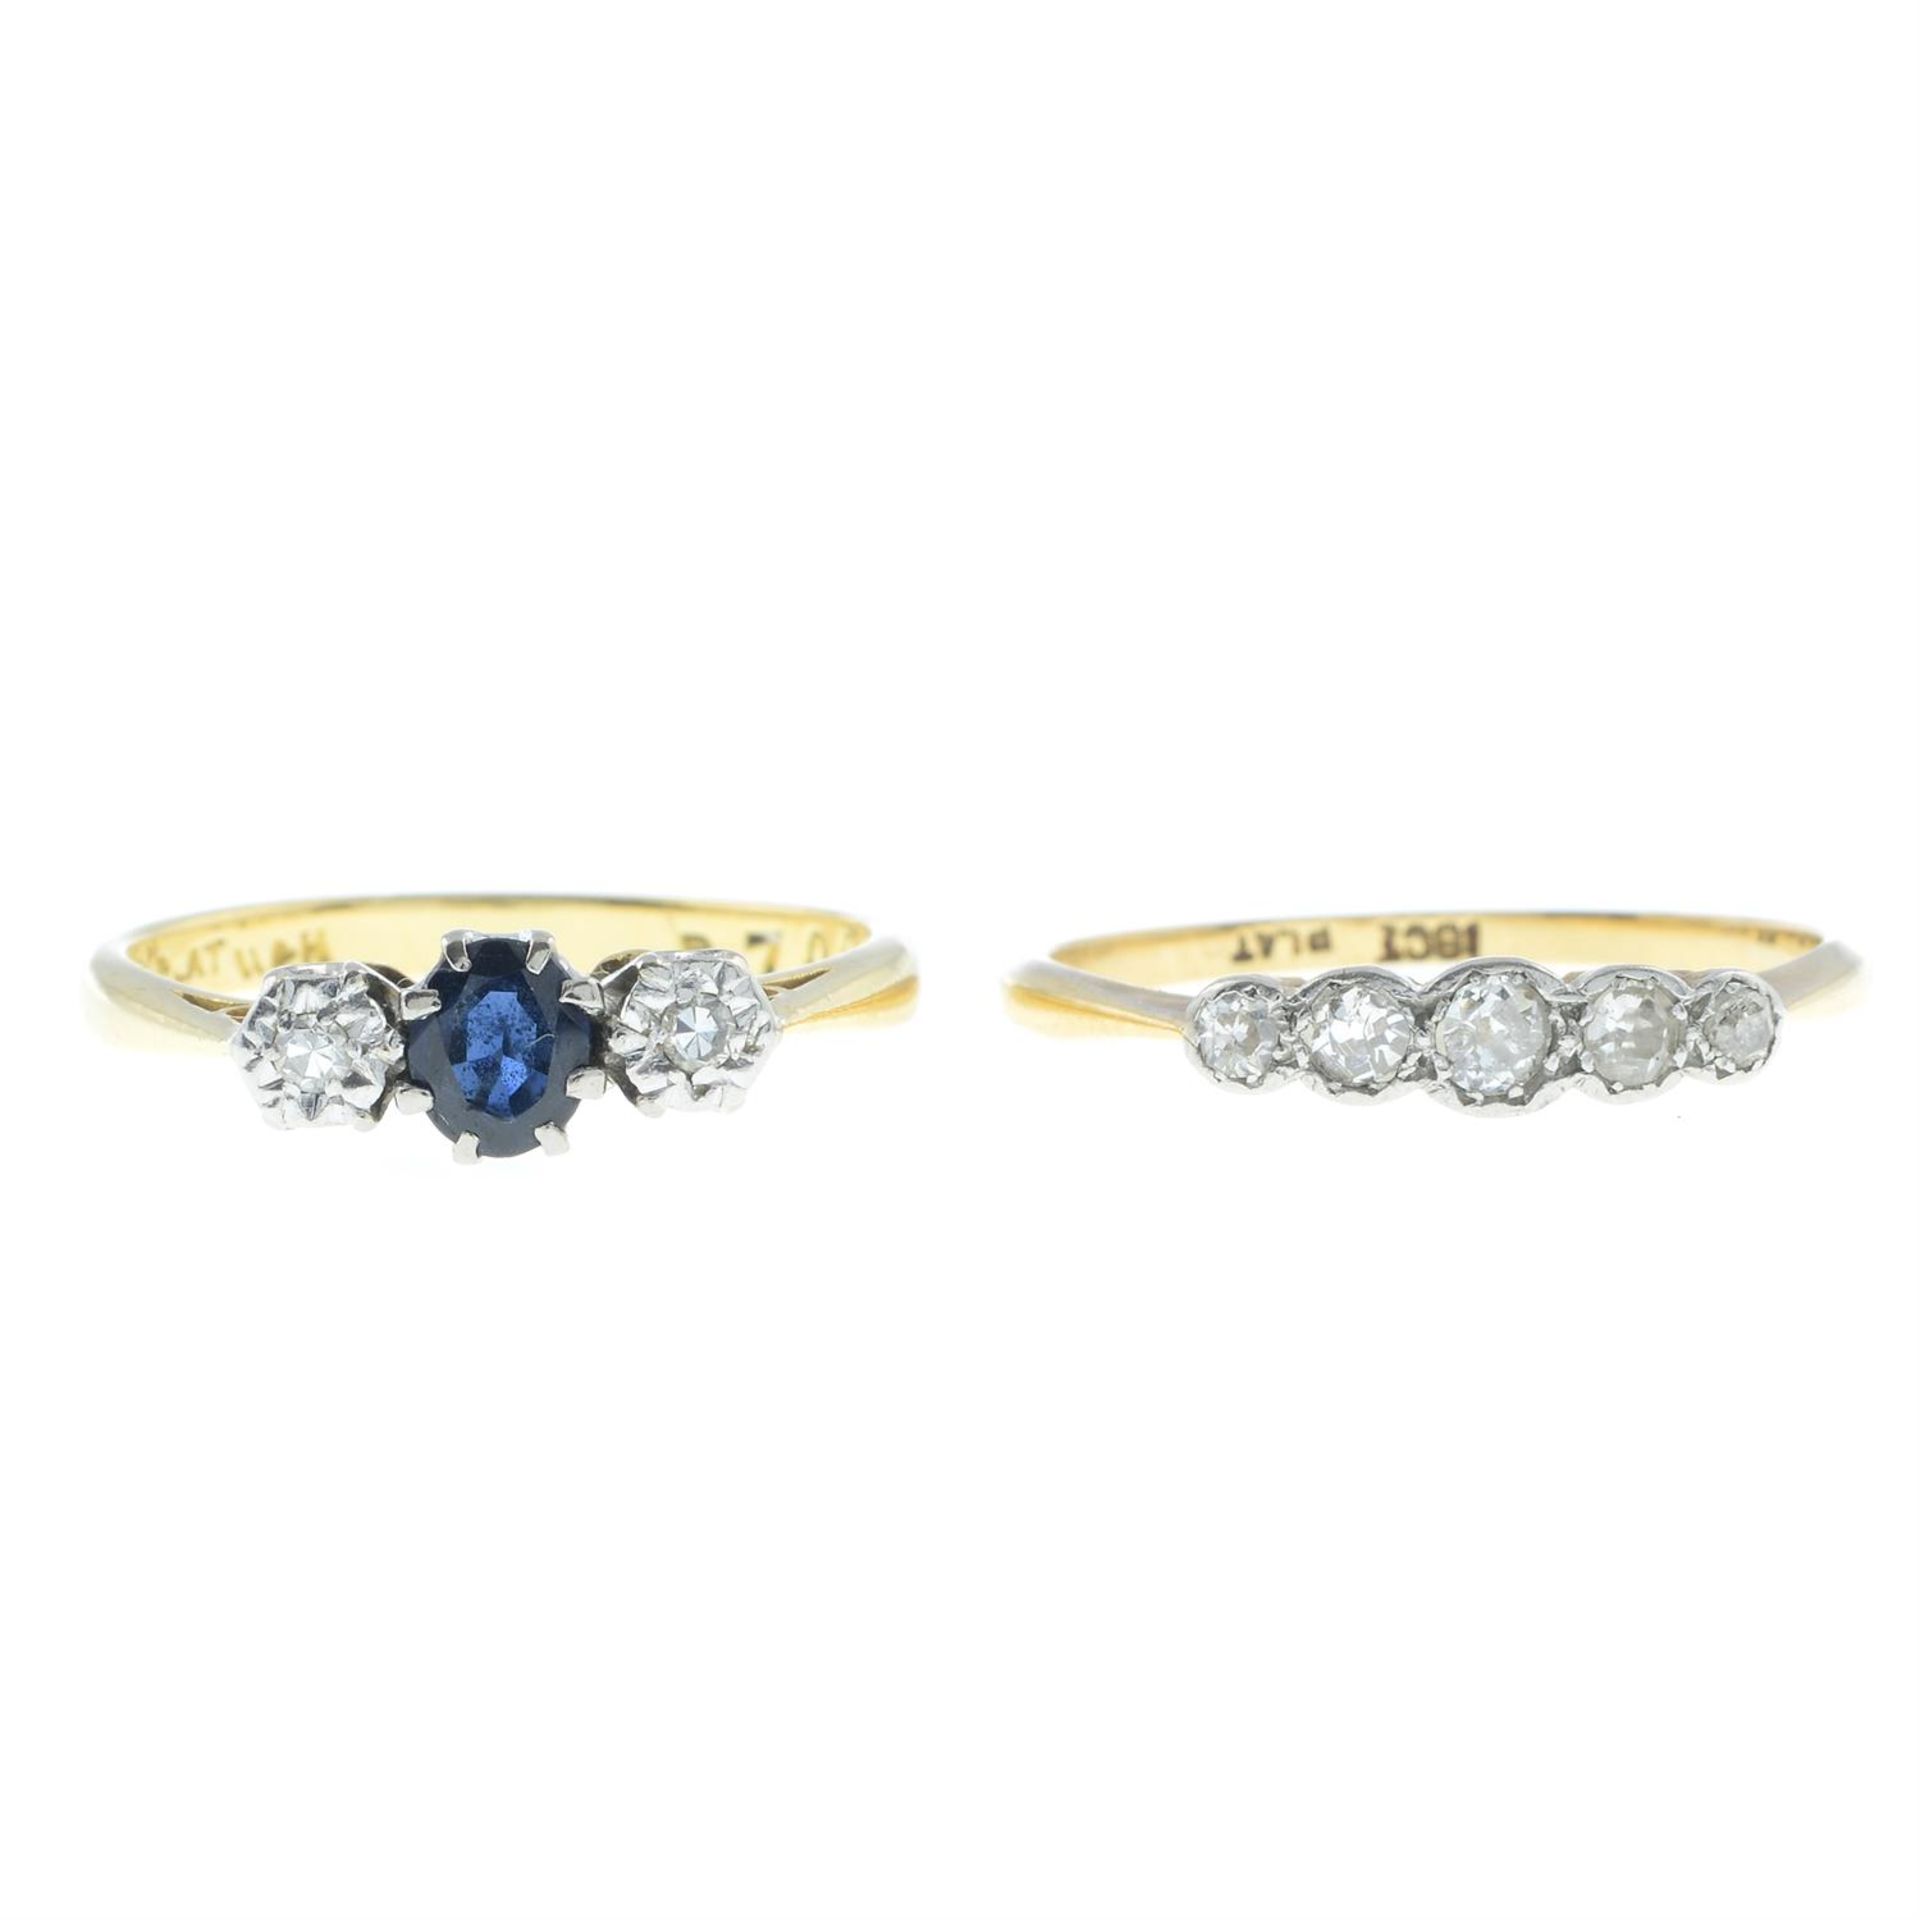 A sapphire and diamond three-stone ring and a diamond five-stone ring.